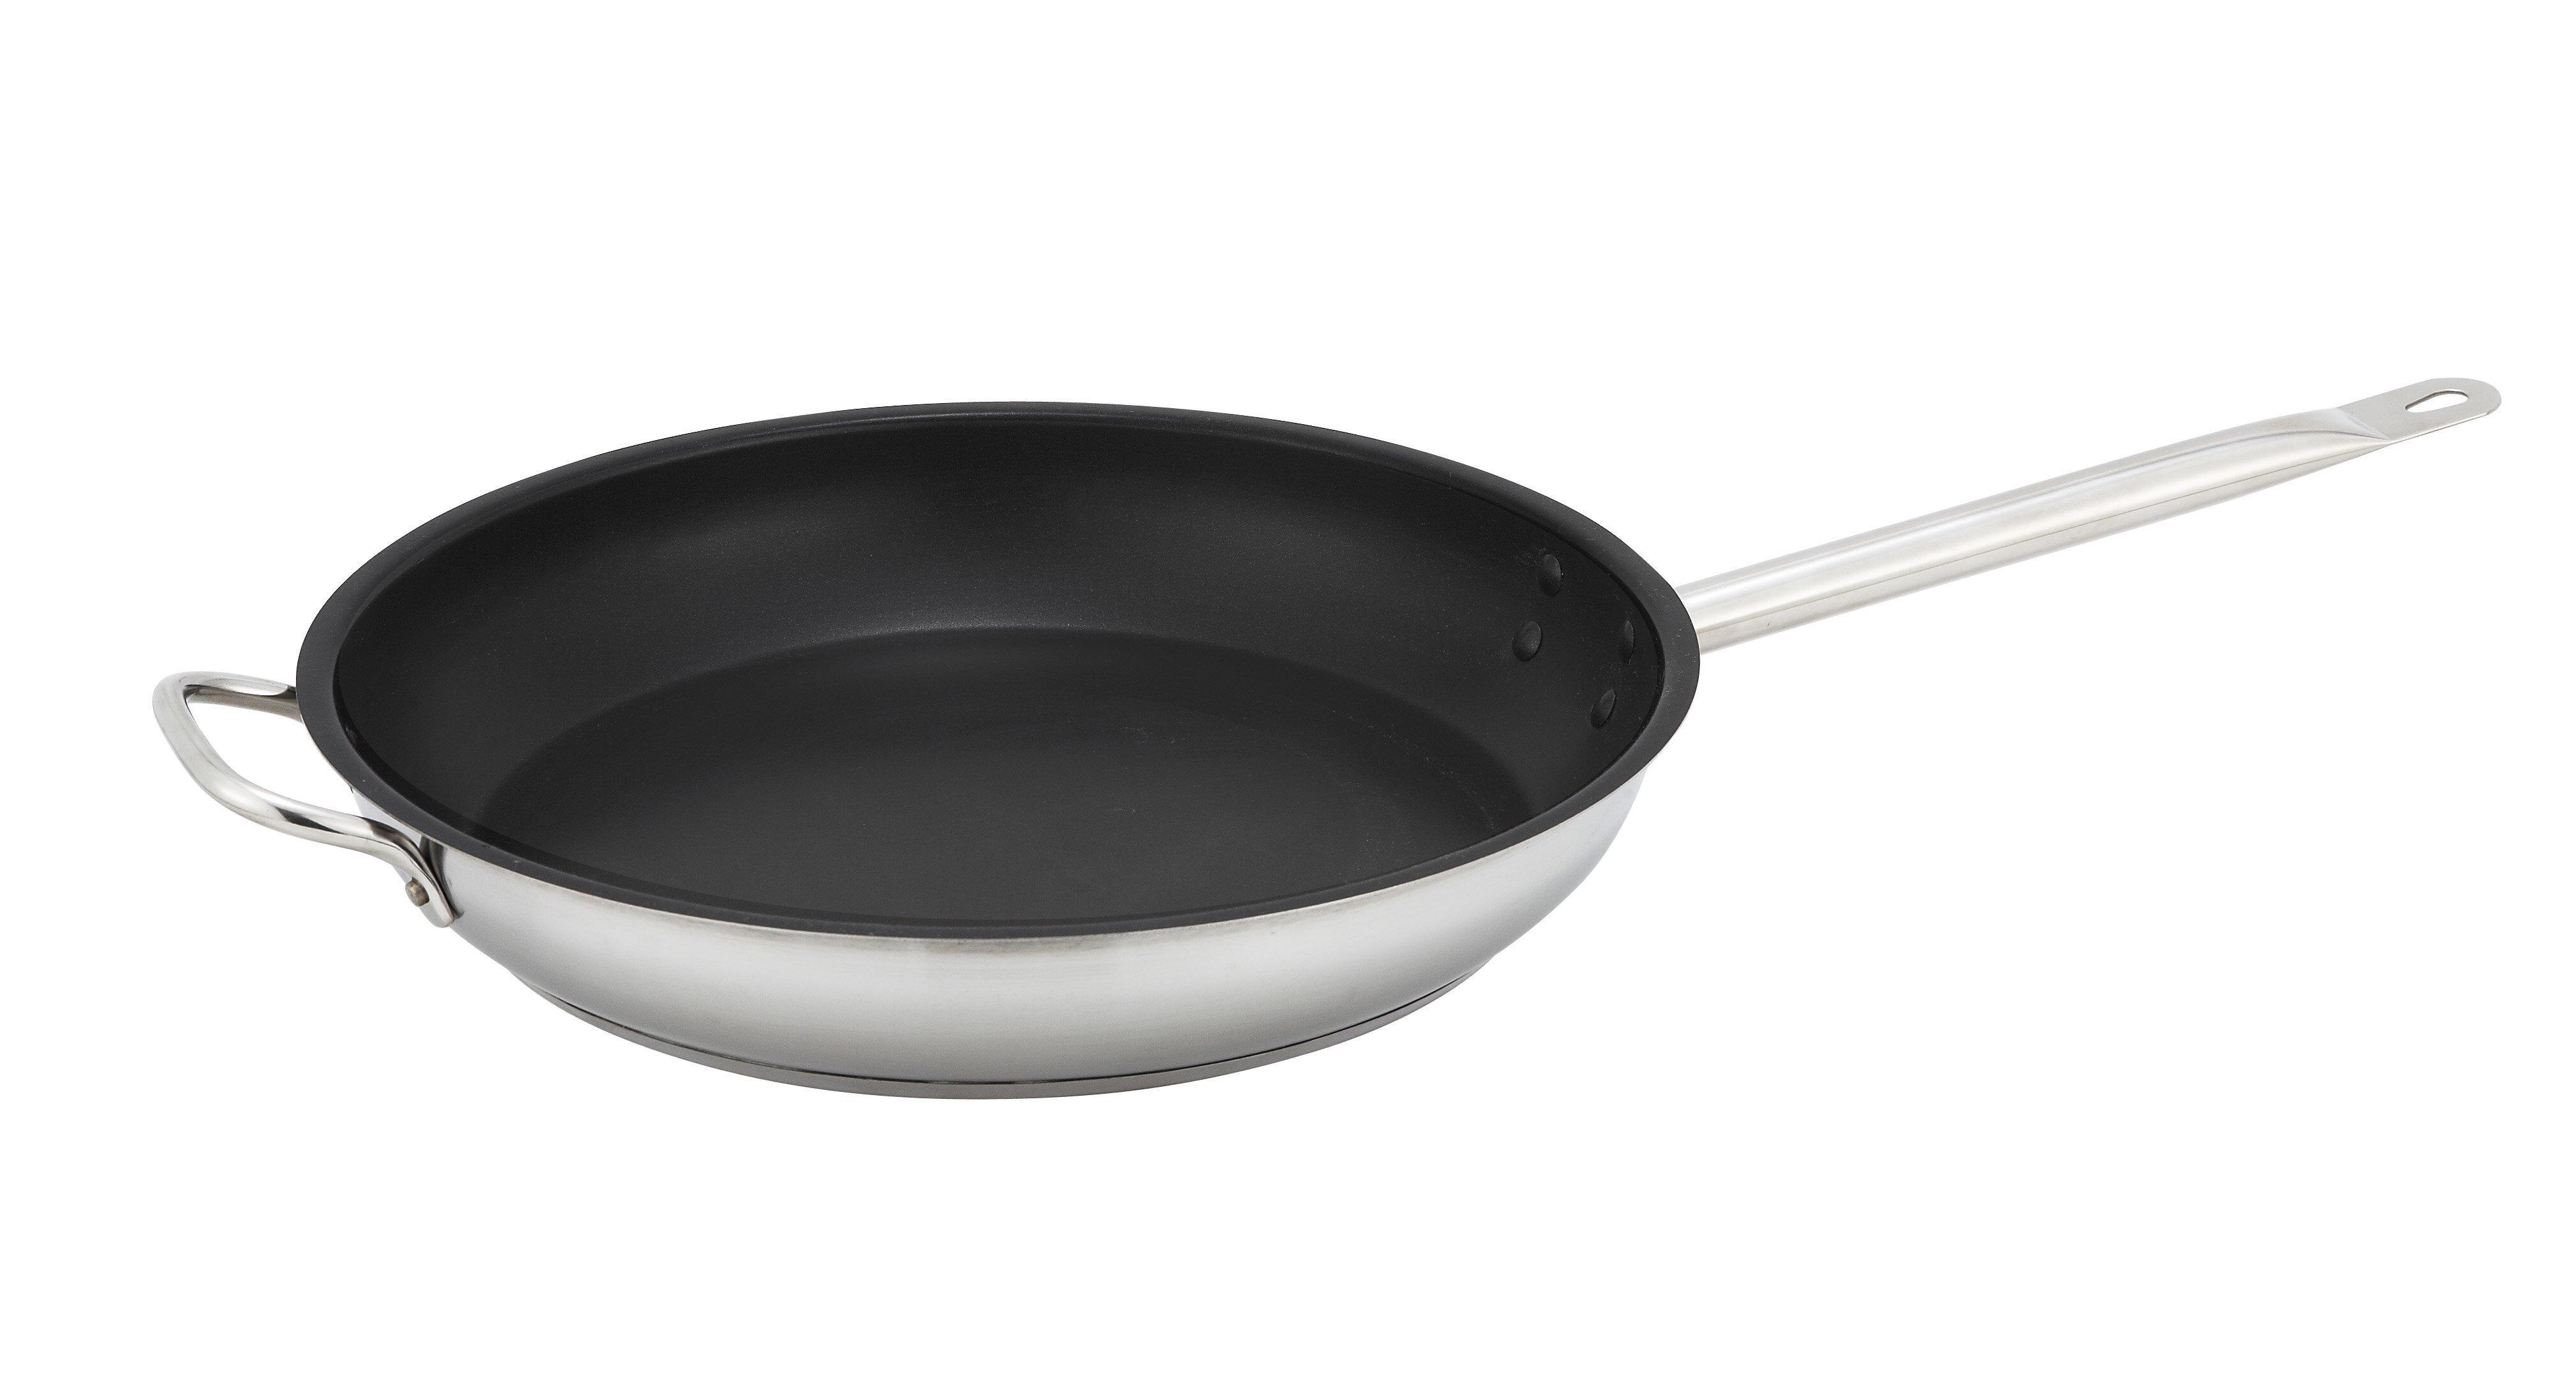 MaximaHouse Non Stick Stainless Steel Frying Pan with Lid Size: 7.9 W SV325R7.9